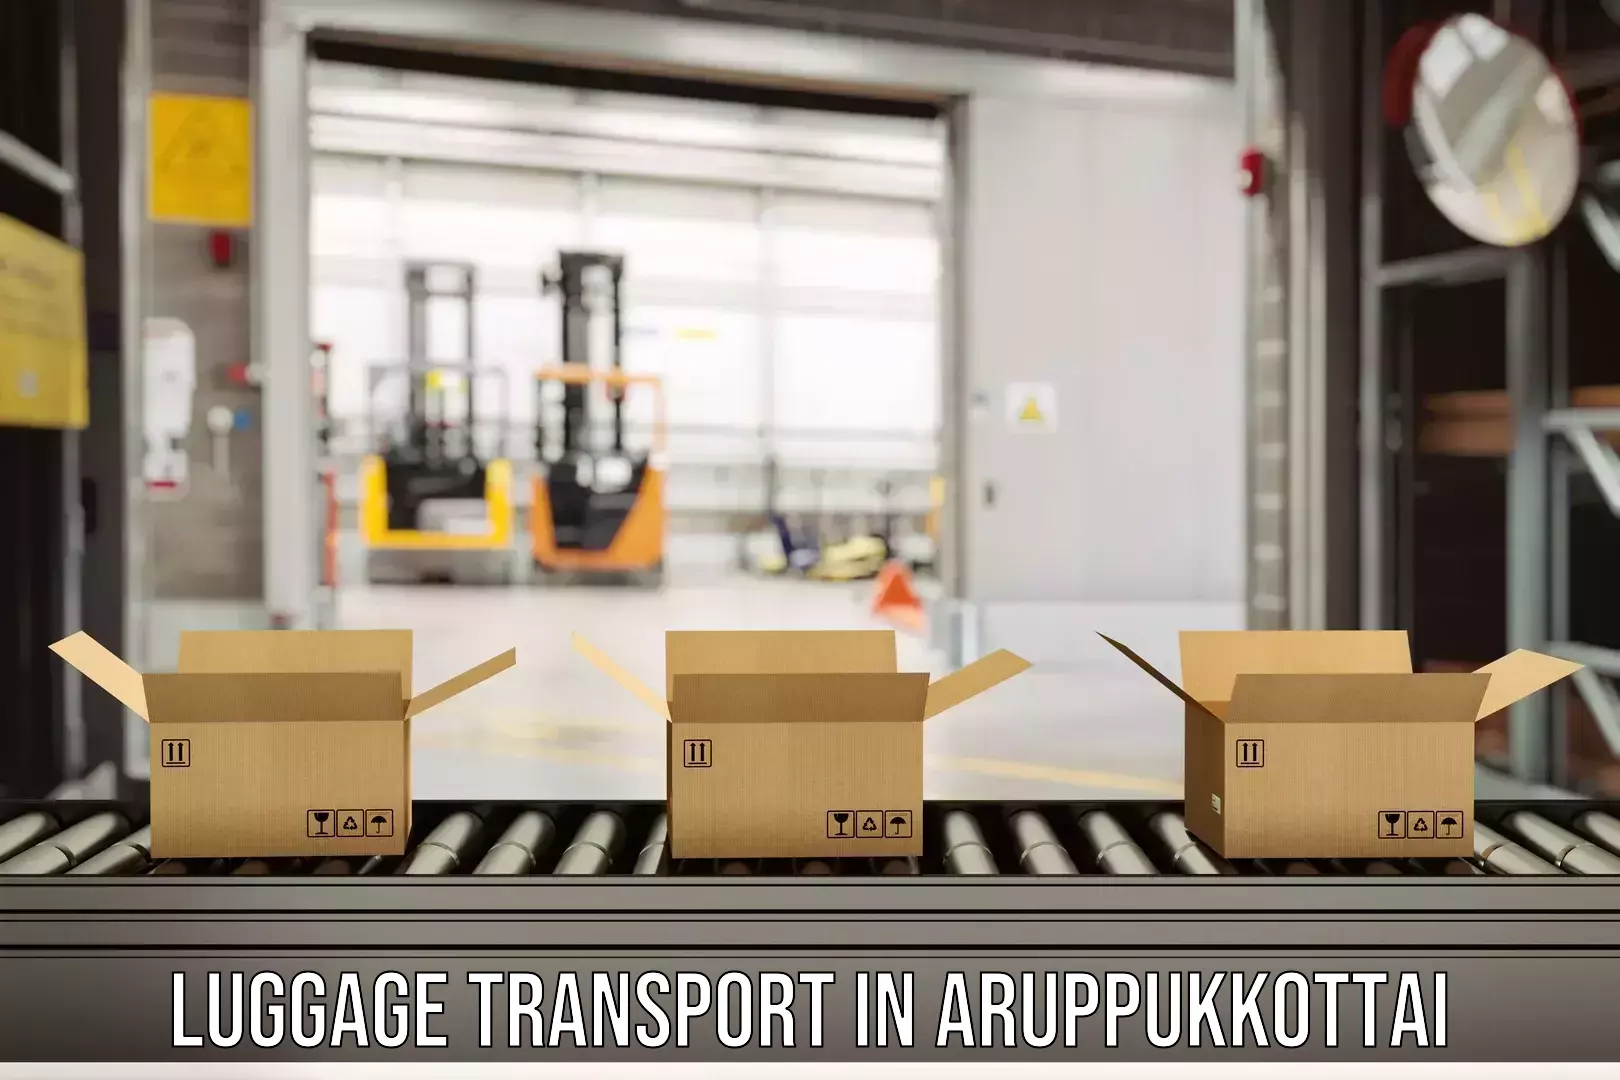 Fast track baggage delivery in Aruppukkottai